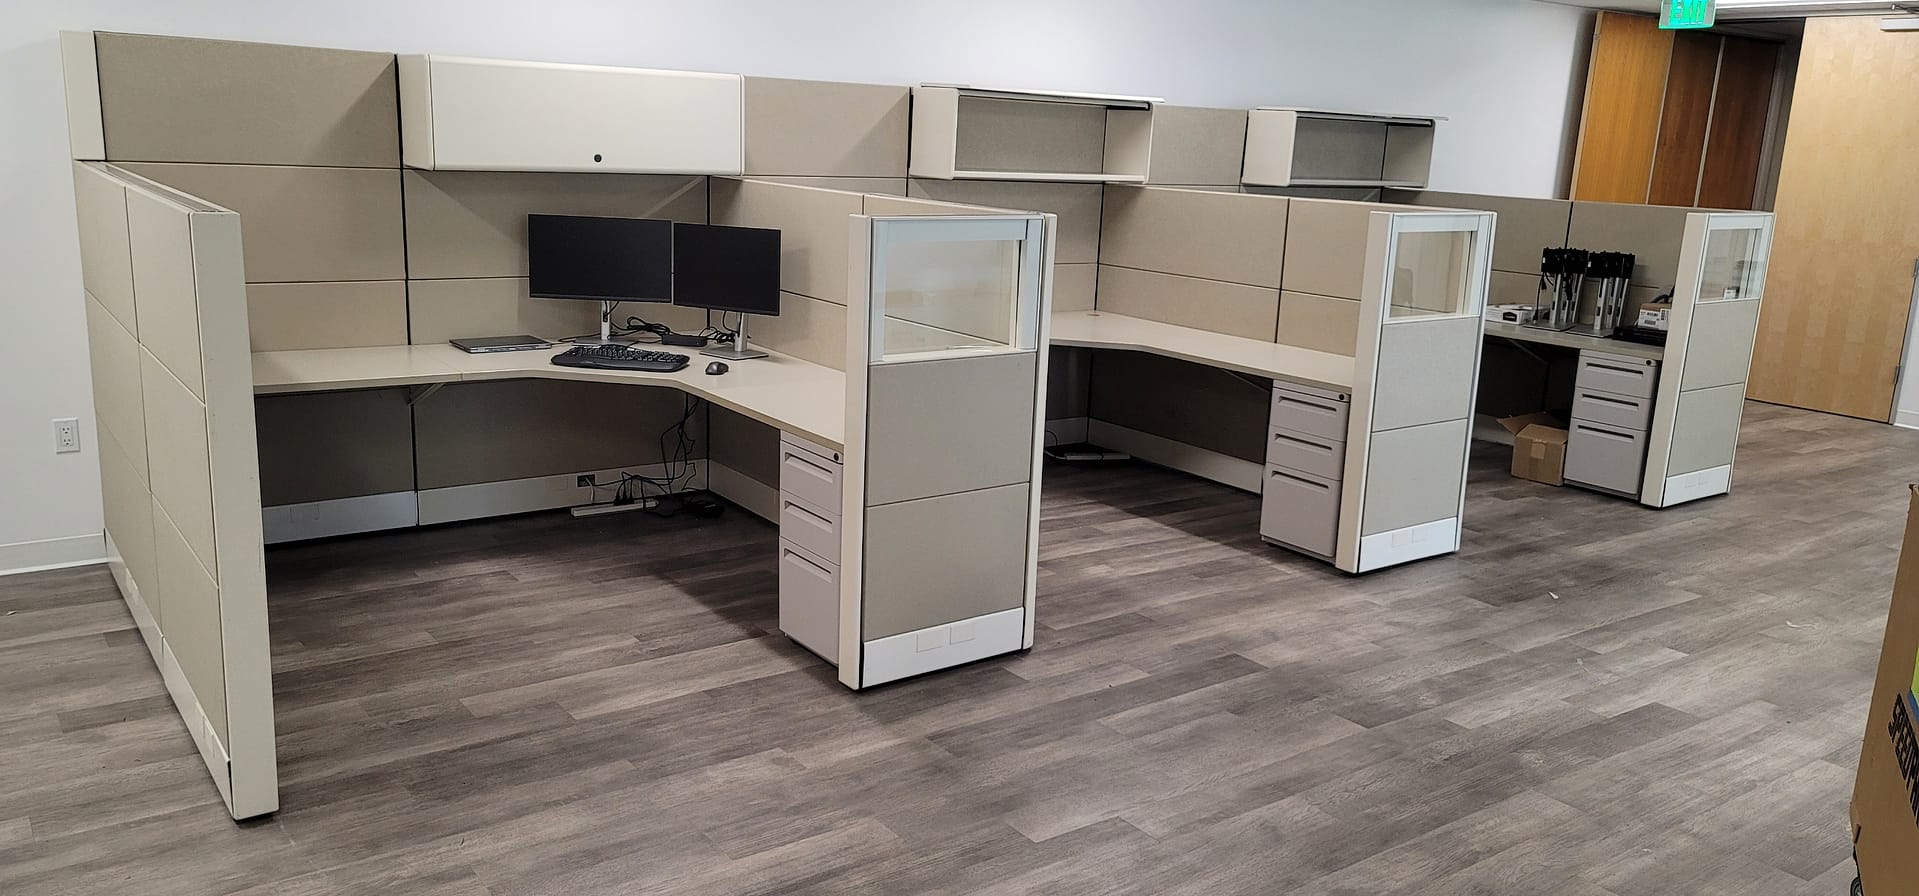 Pre-Owned Cubicles, Used Cubicles, Cubicles, Refurbished cubicles, Cubicles for Sale